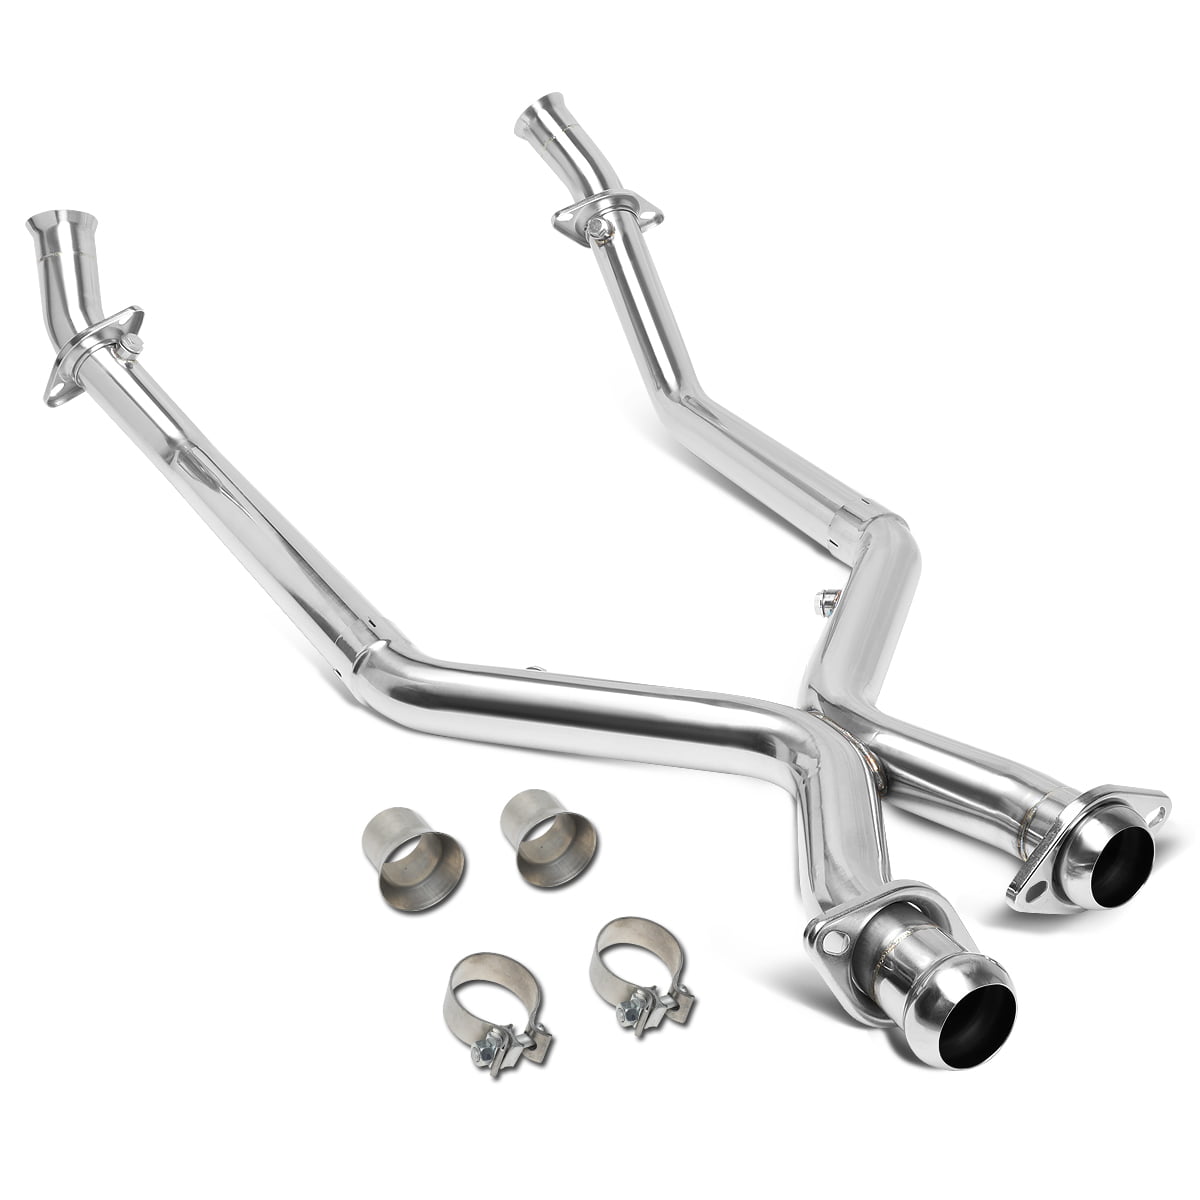 For 1999 to 2004 Ford Mustang 3.8L V6 (Shorty Header) Stainless Steel